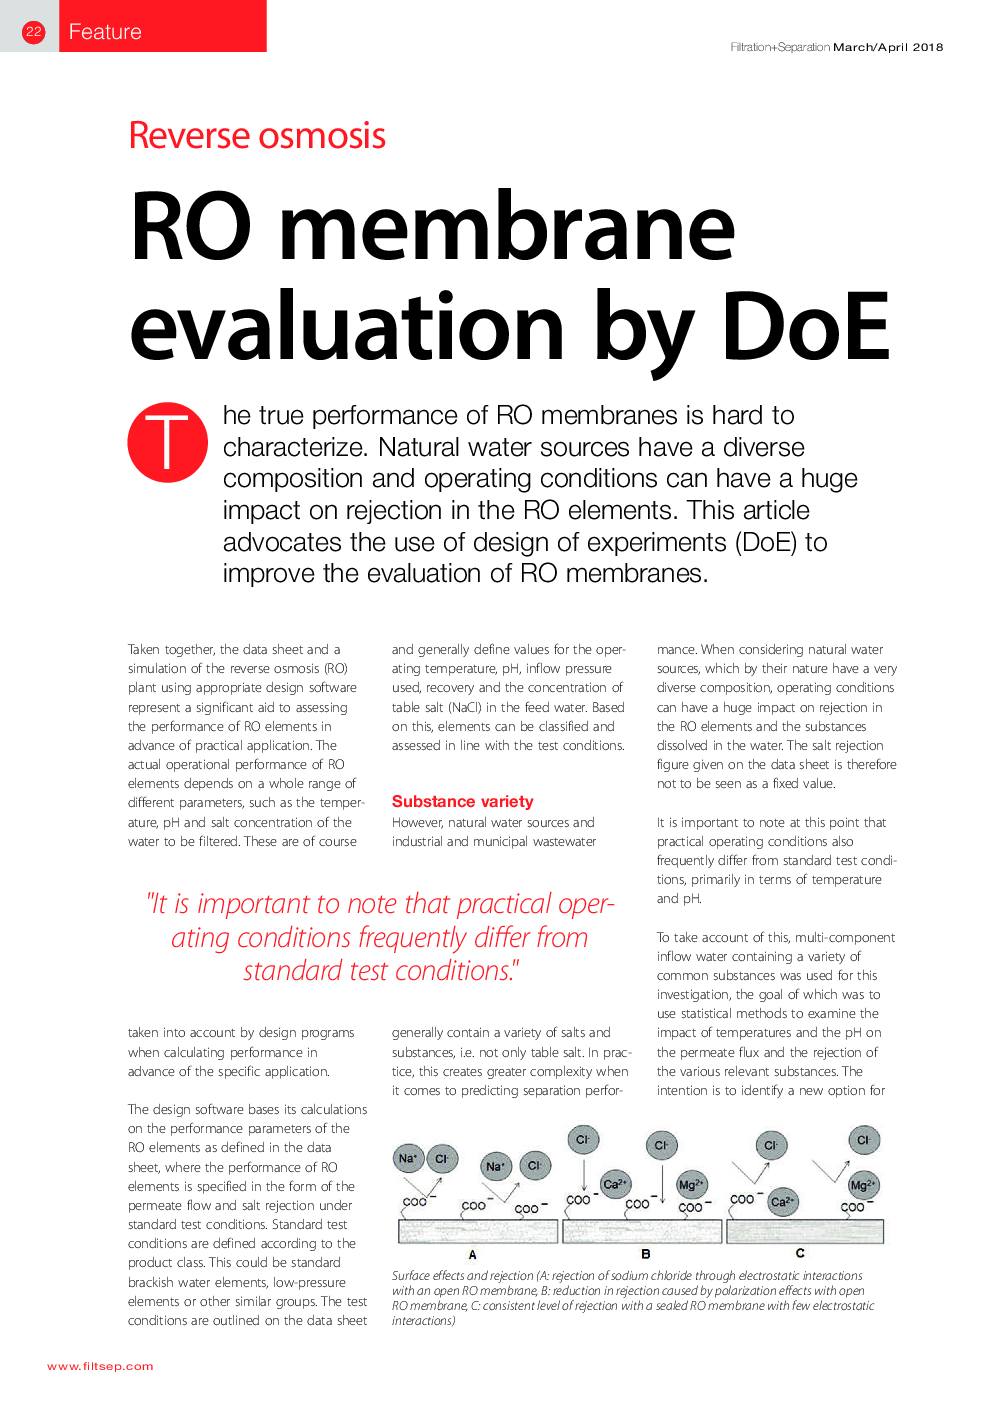 RO membrane evaluation by DoE